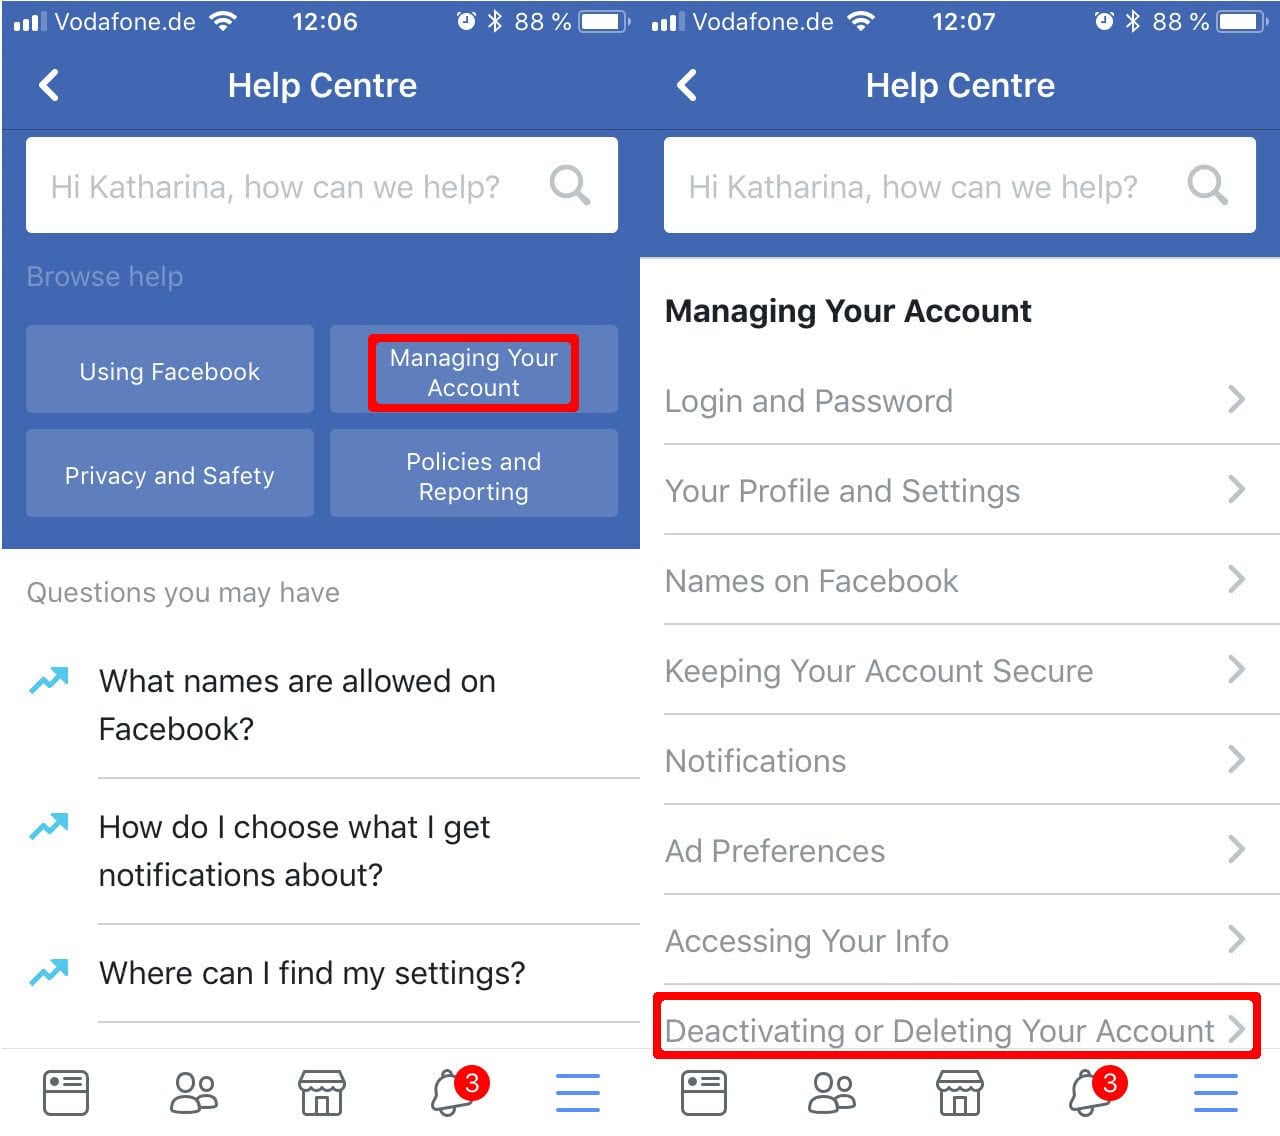 To delete a Facebook account from a deceased user, you must fill out the fo...